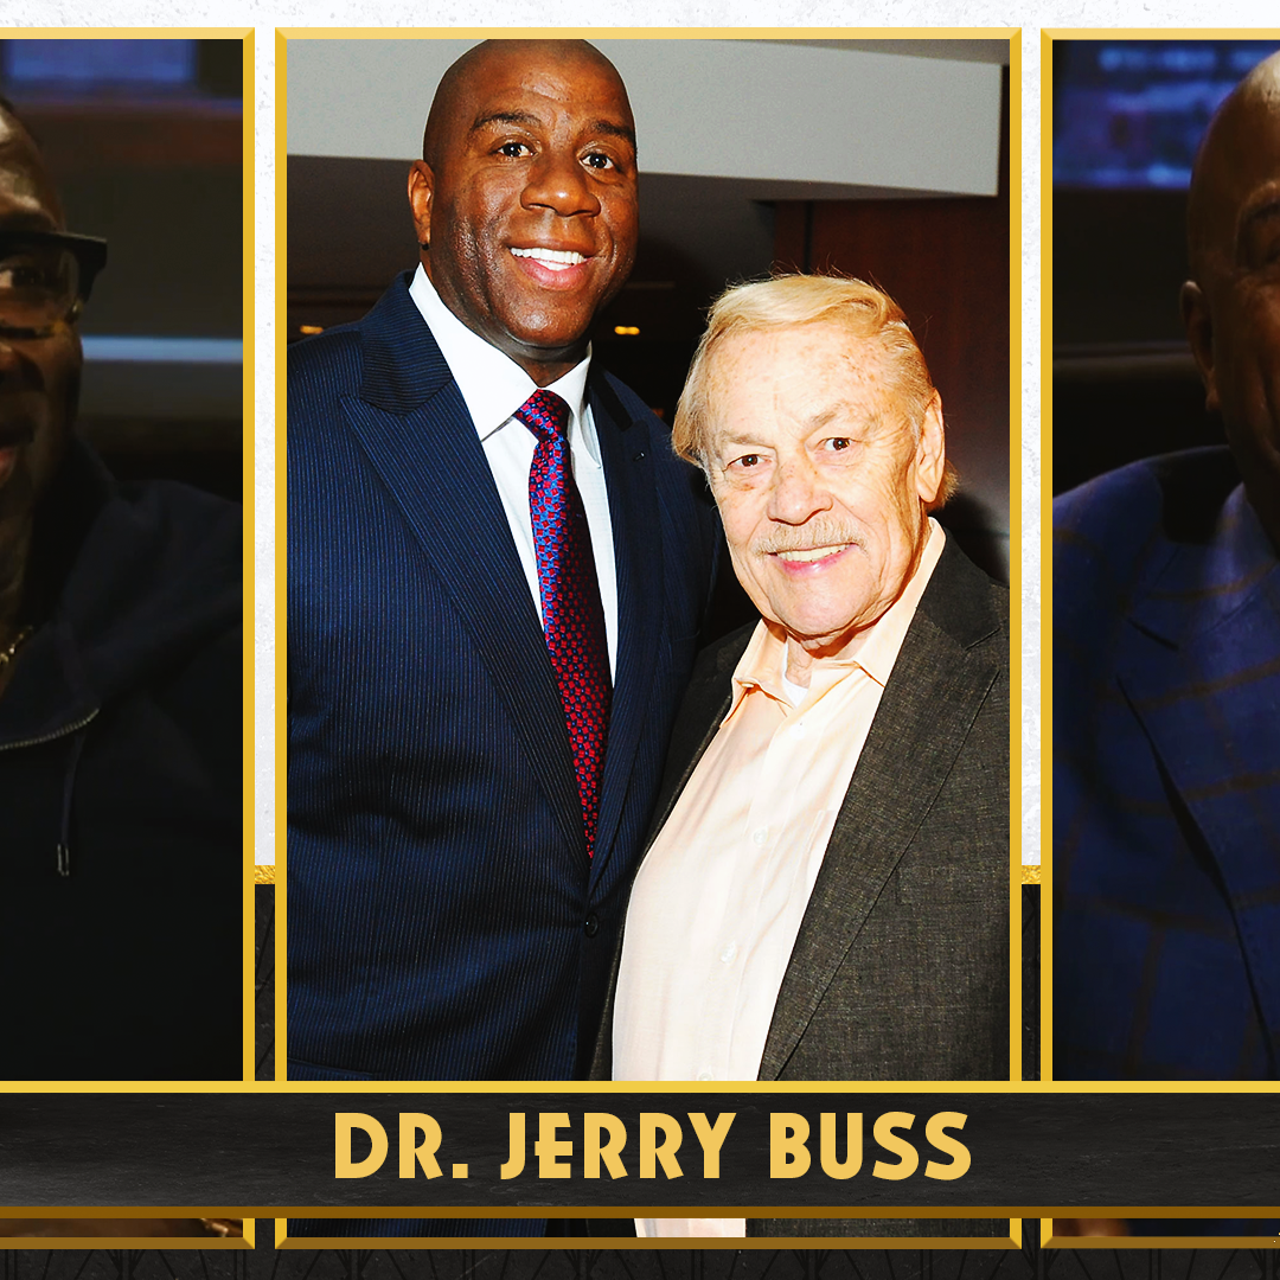 Dodgers players thrilled Magic Johnson is new team owner - Los